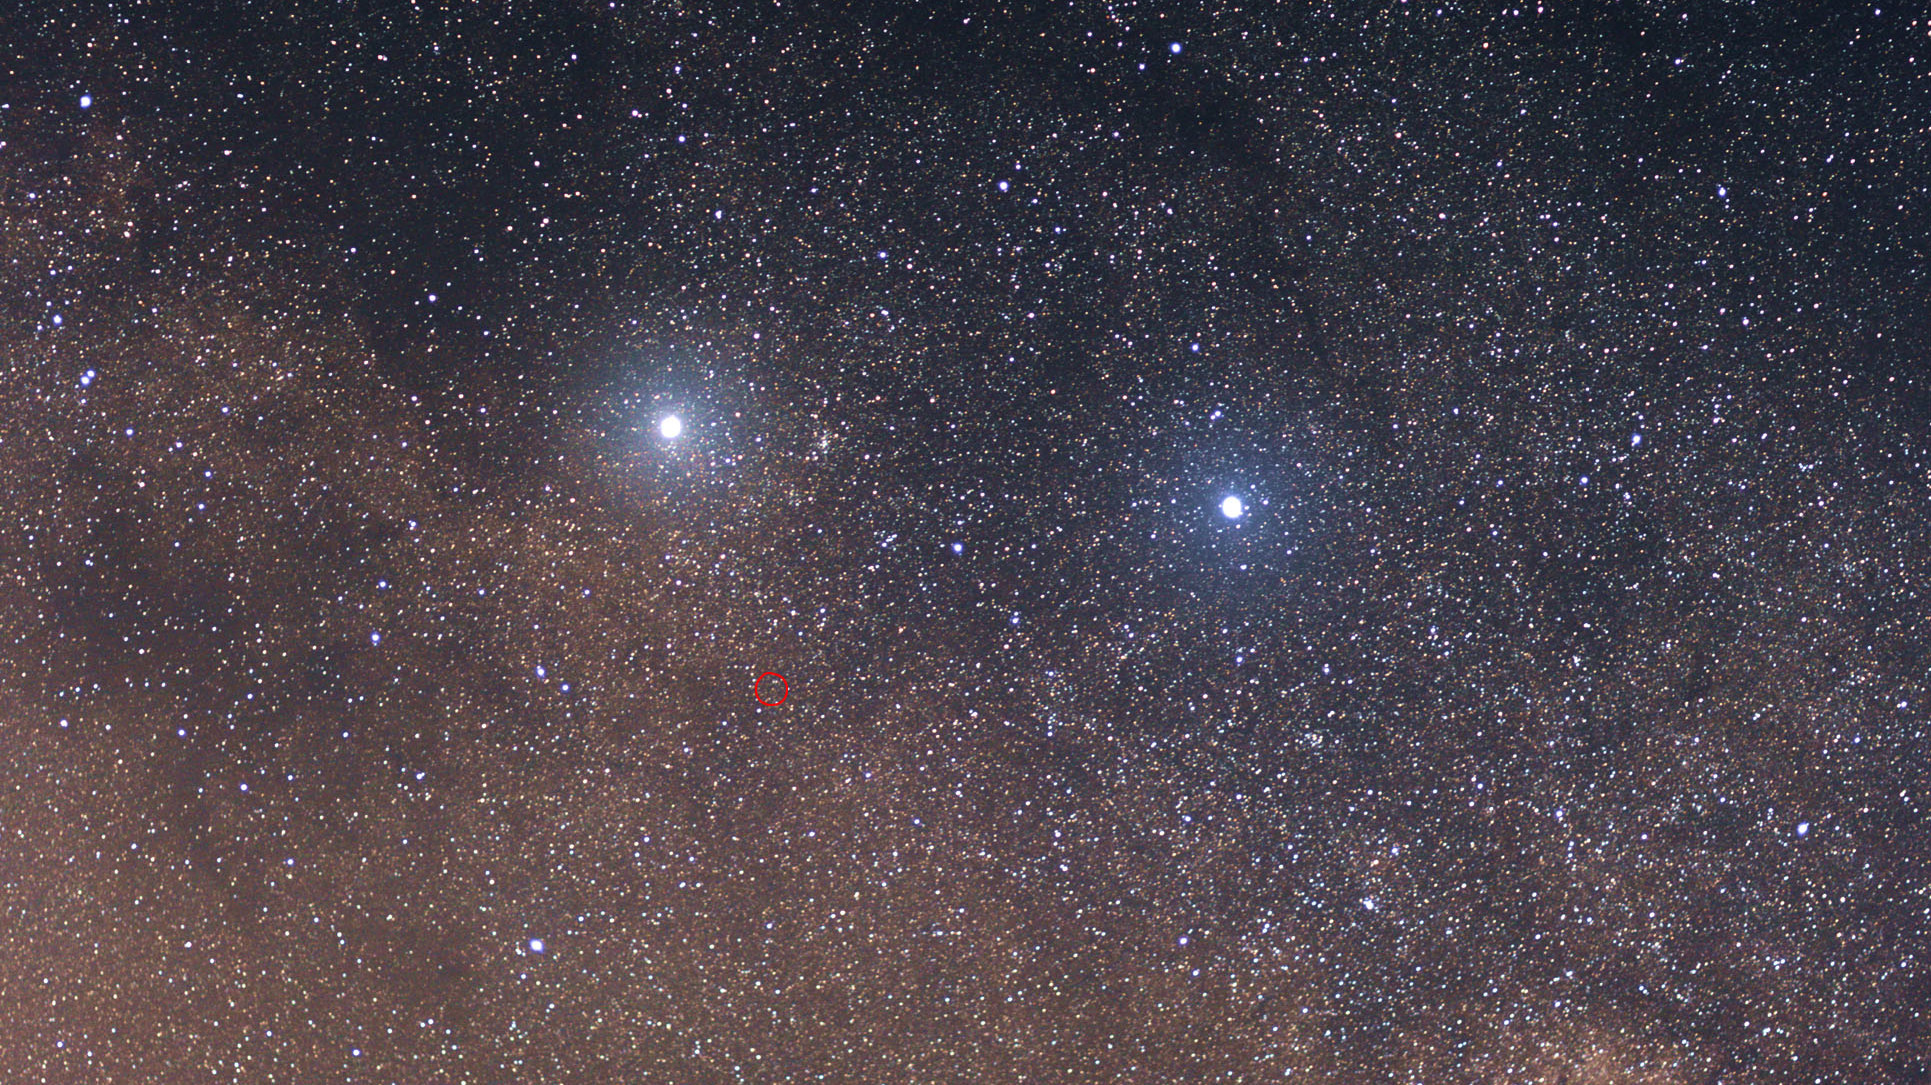 Alpha and Beta Centauri, with Proxima Centauri circled in red. (Image: Wikimedia Commons, Fair Use)